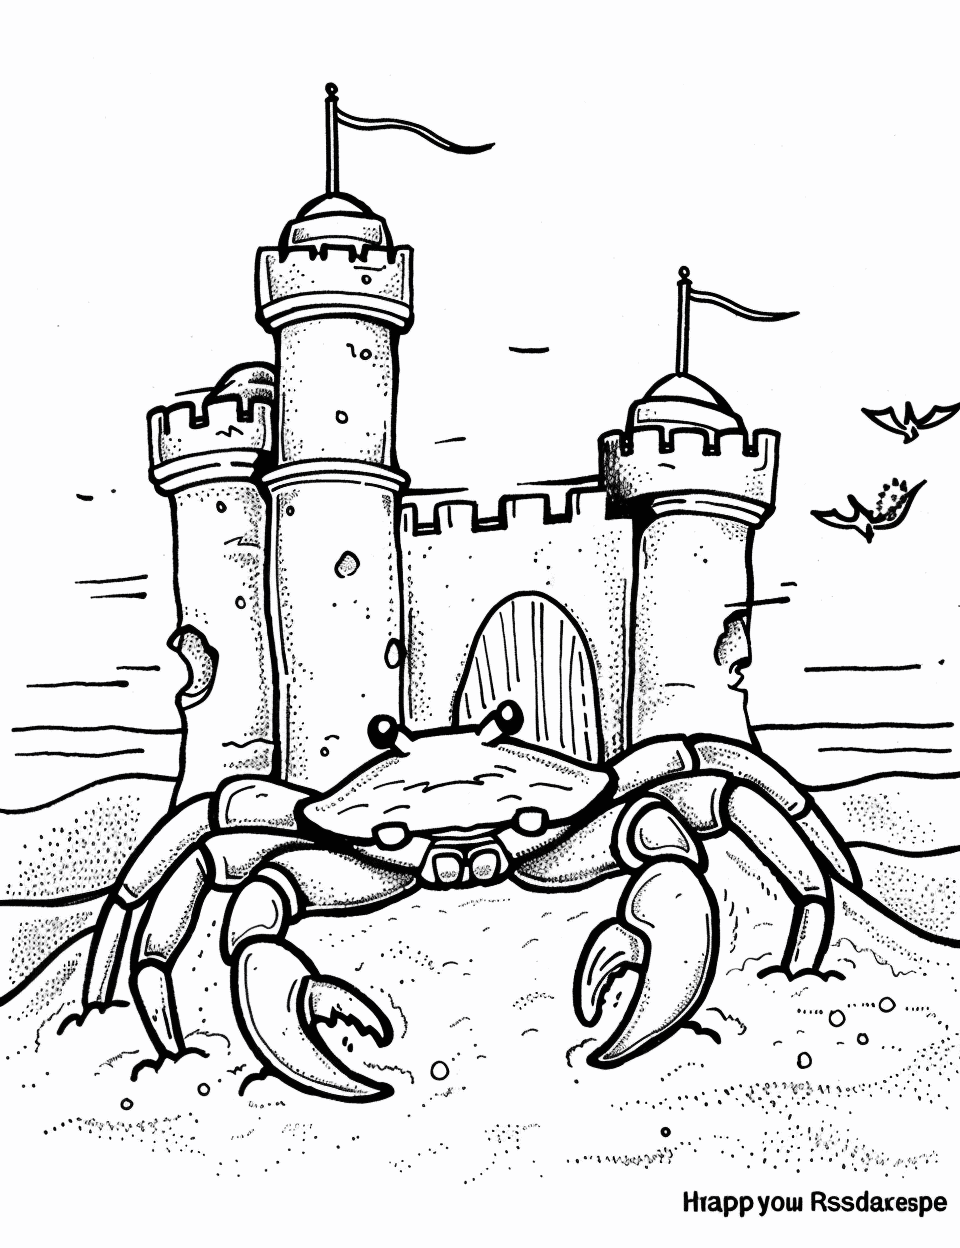 Sand Castle Guardian Crab Coloring Page - A small crab next to a sand castle, acting as the guardian of this miniature sandy fort.